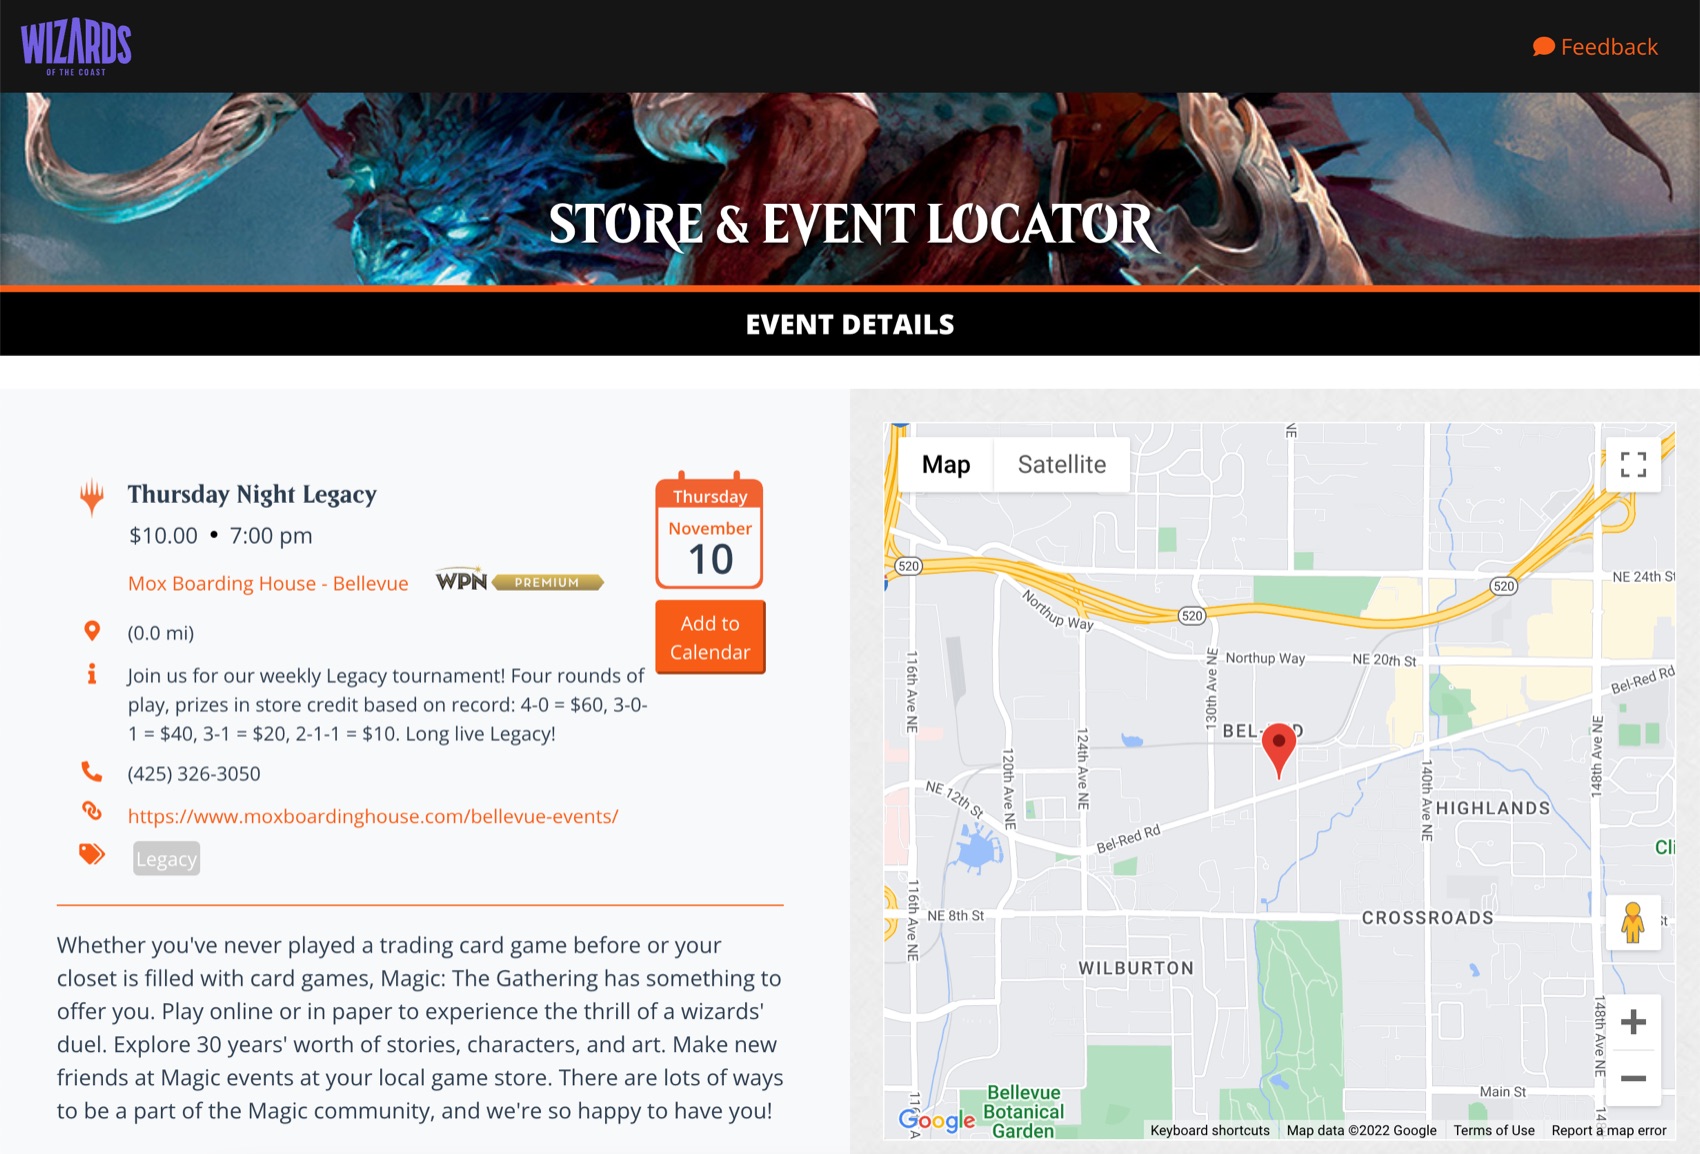 Example of desktop event details page